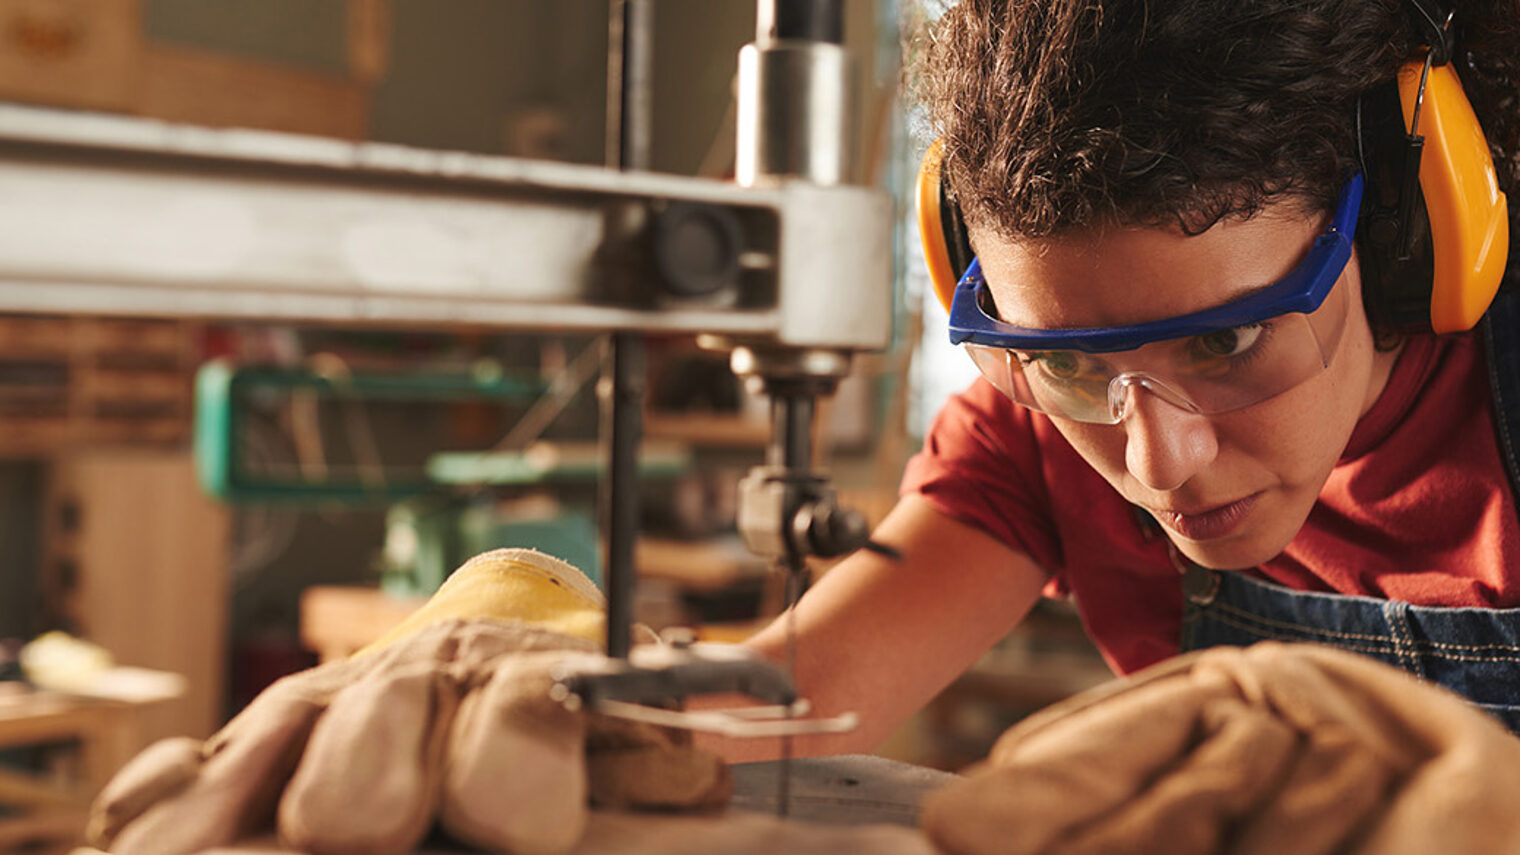 Close-up view of young concentrated female carpenter in safety glasses and ear defenders drilling hole in wooden plank with drill press Schlagwort(e): closeup, woman, female, curly, concentration, professional, carpentry, joinery, workshop, working, occupation, woodworking, processing, tool, equipment, machinery, drill, hole, press, wood, wooden, plank, board, timber, craft, craftsman, handyman, industry, manufacturing, instrument, protective, glasses, ear, defender, safety